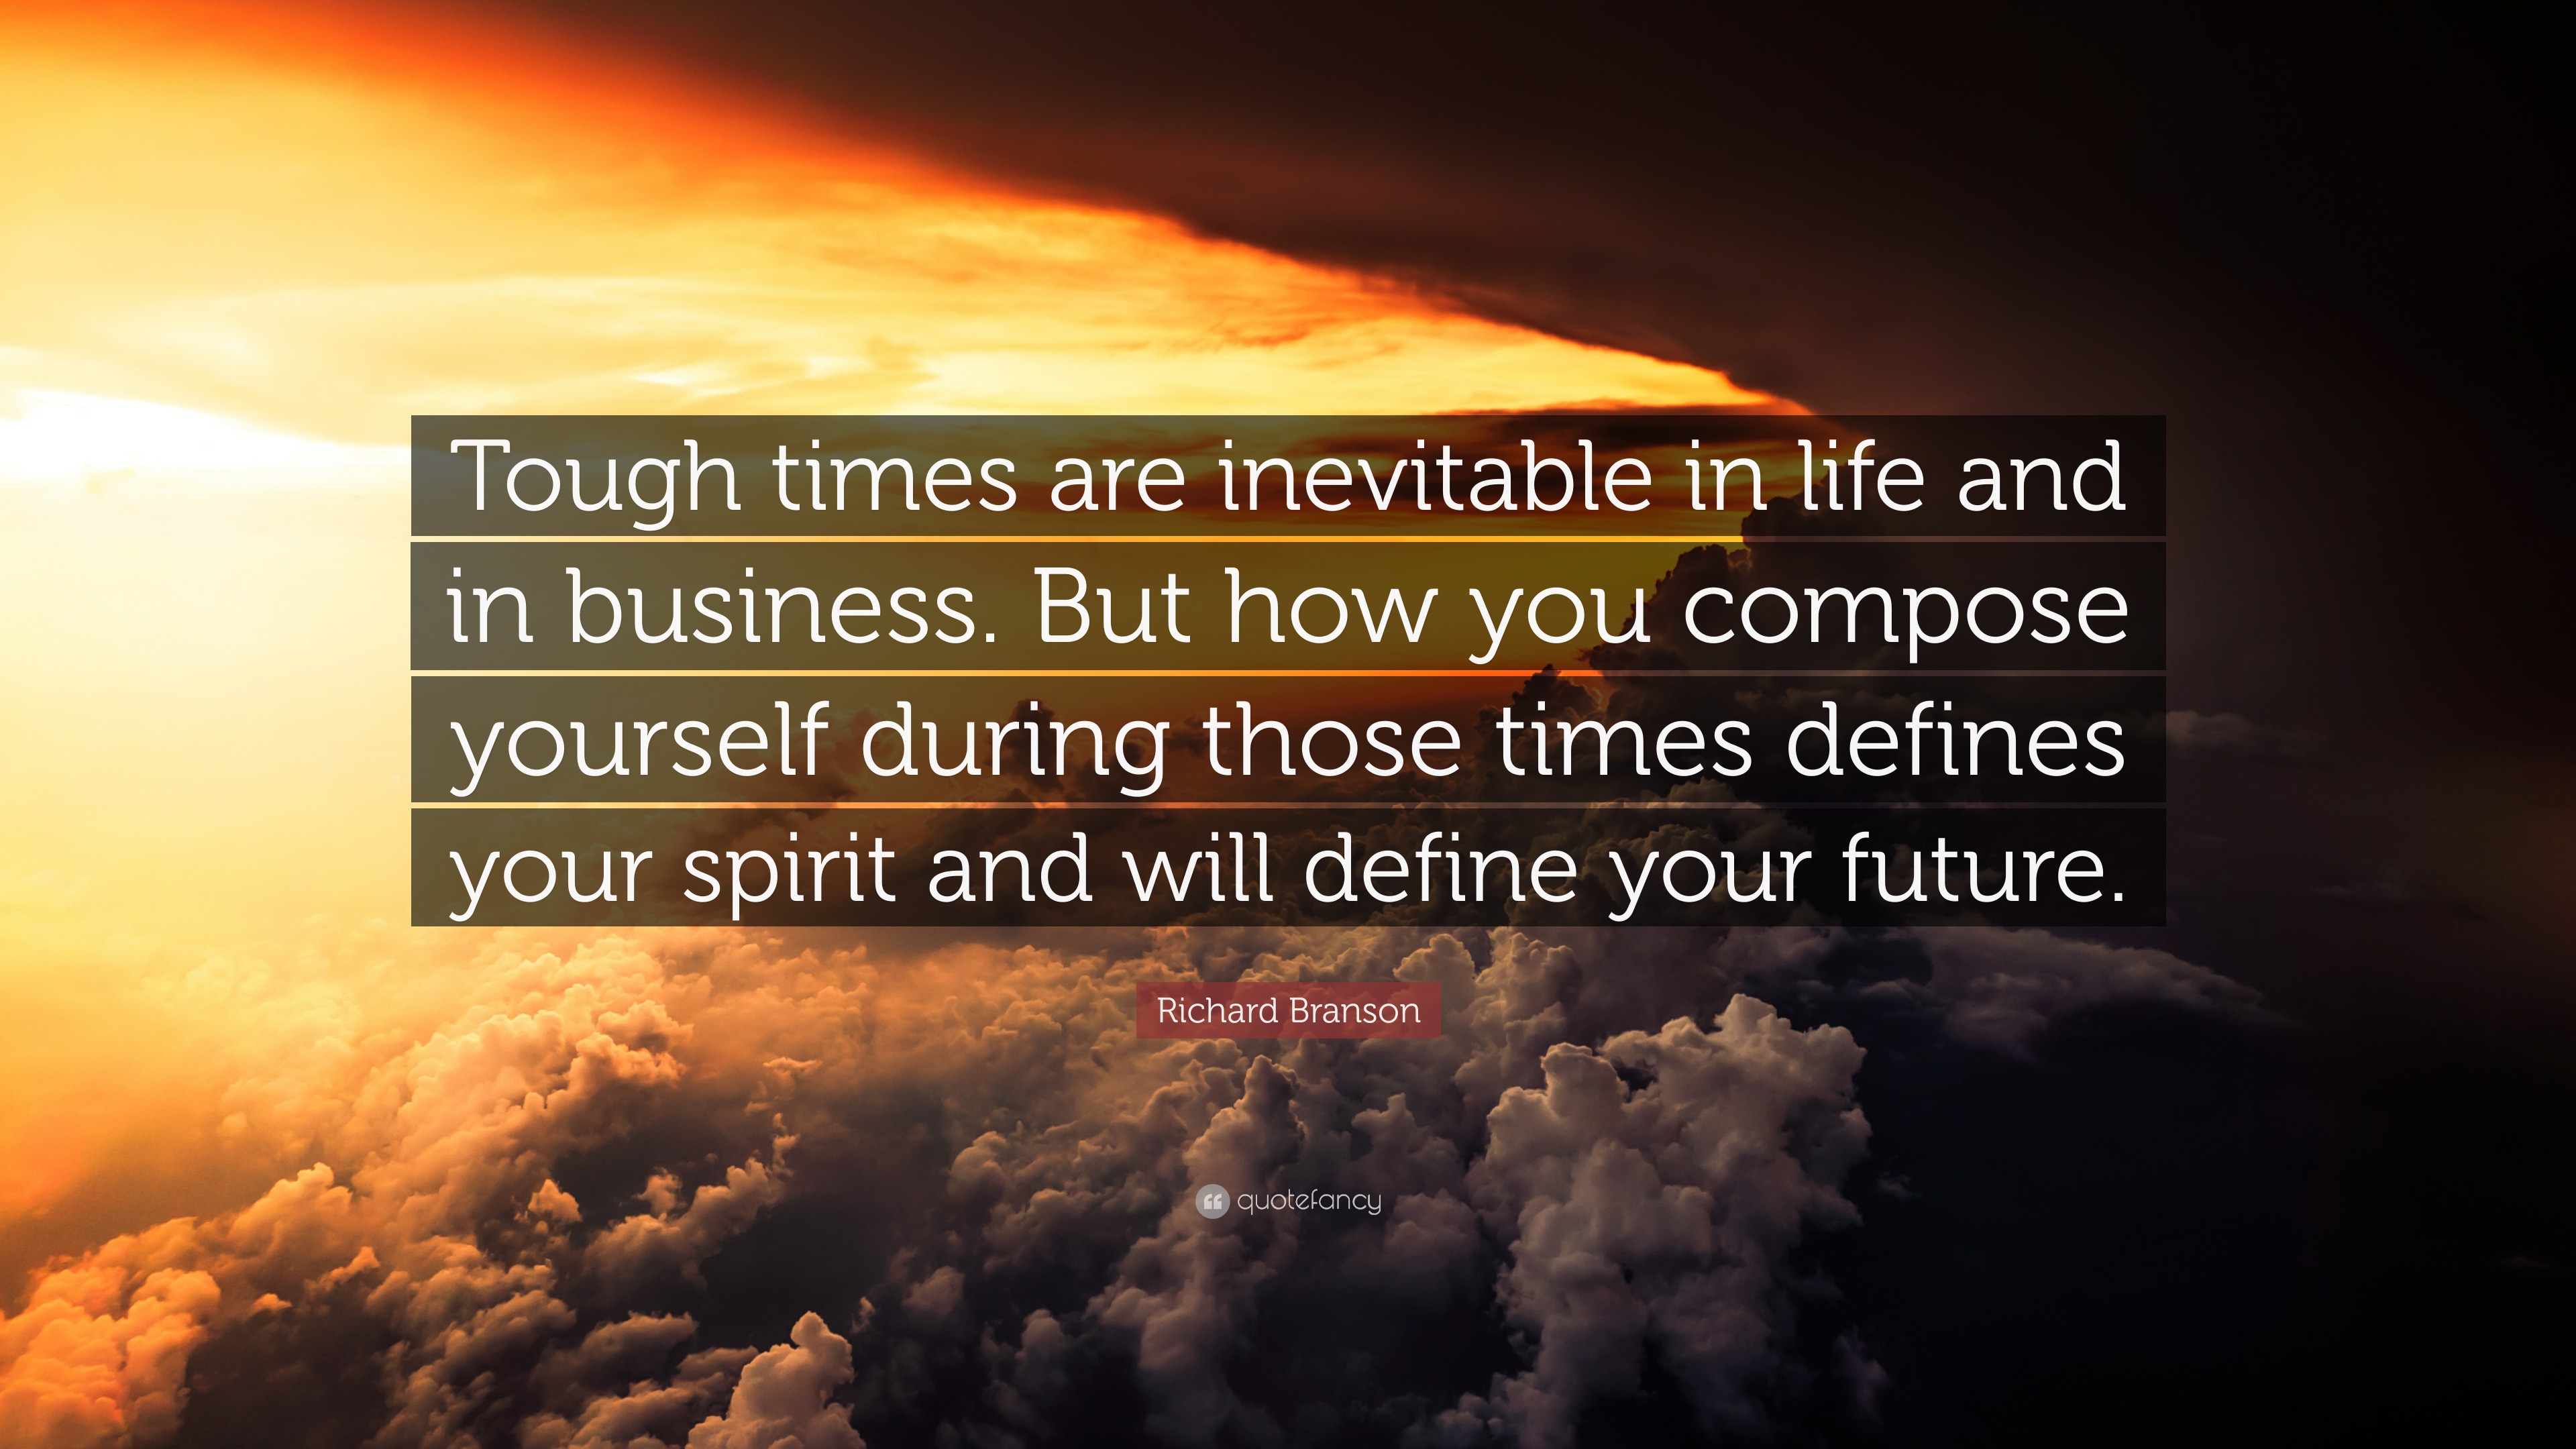 Richard Branson Quote: “Tough times are inevitable in life and in